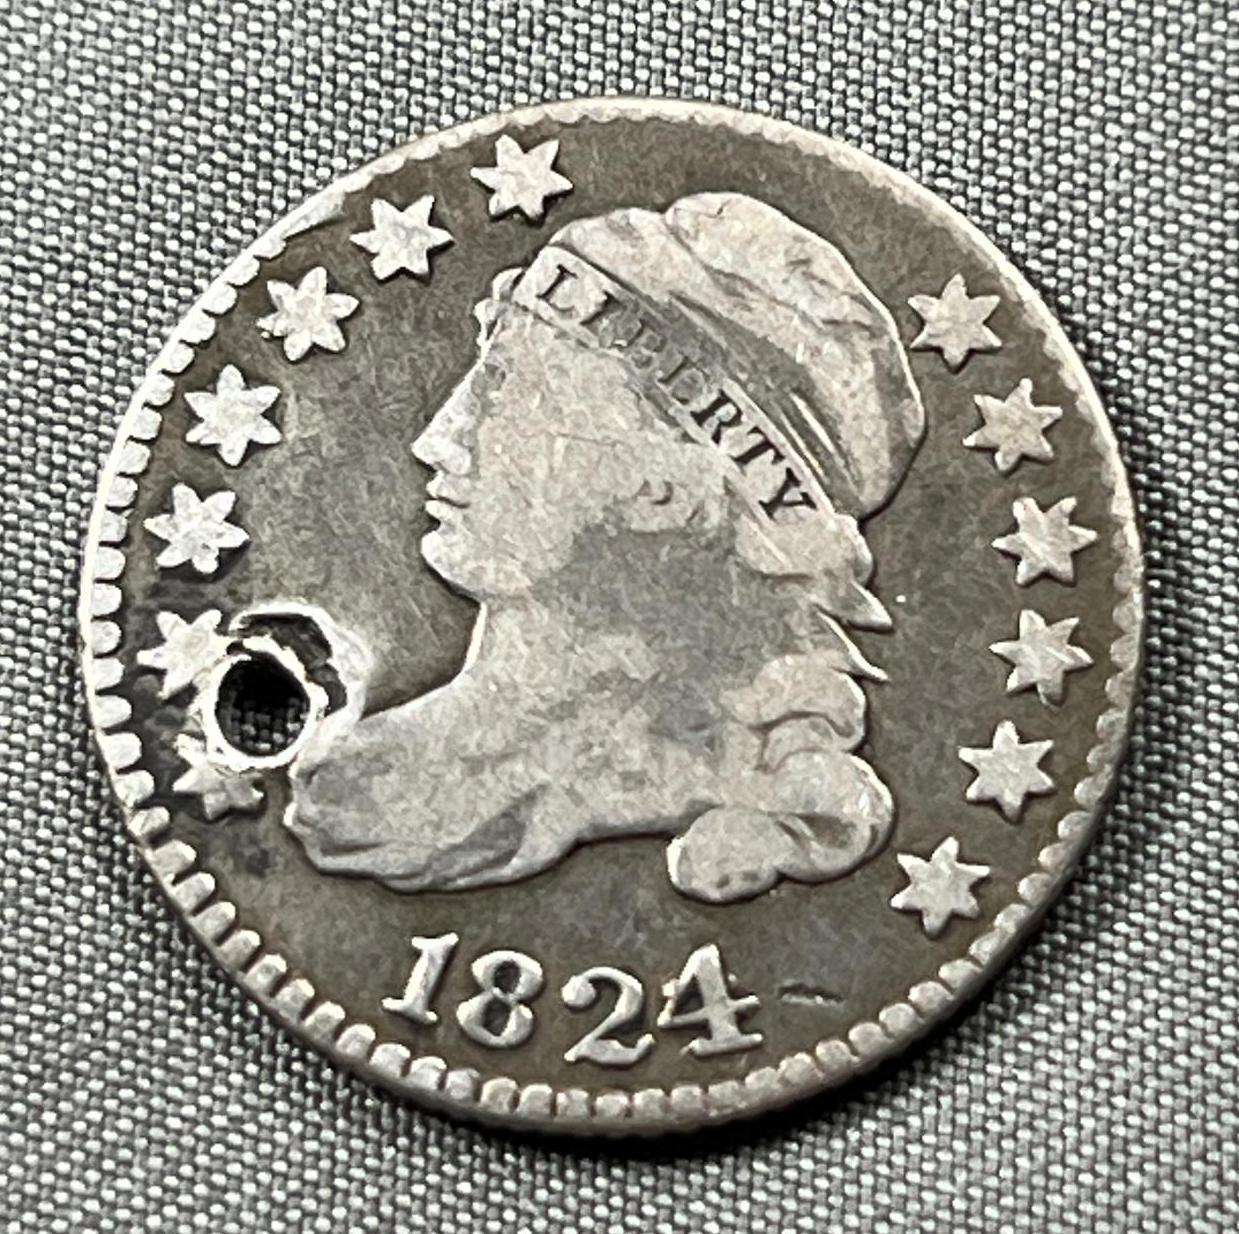 1824 Capped Bust Dime, Full LIBERTY, nice early type coin